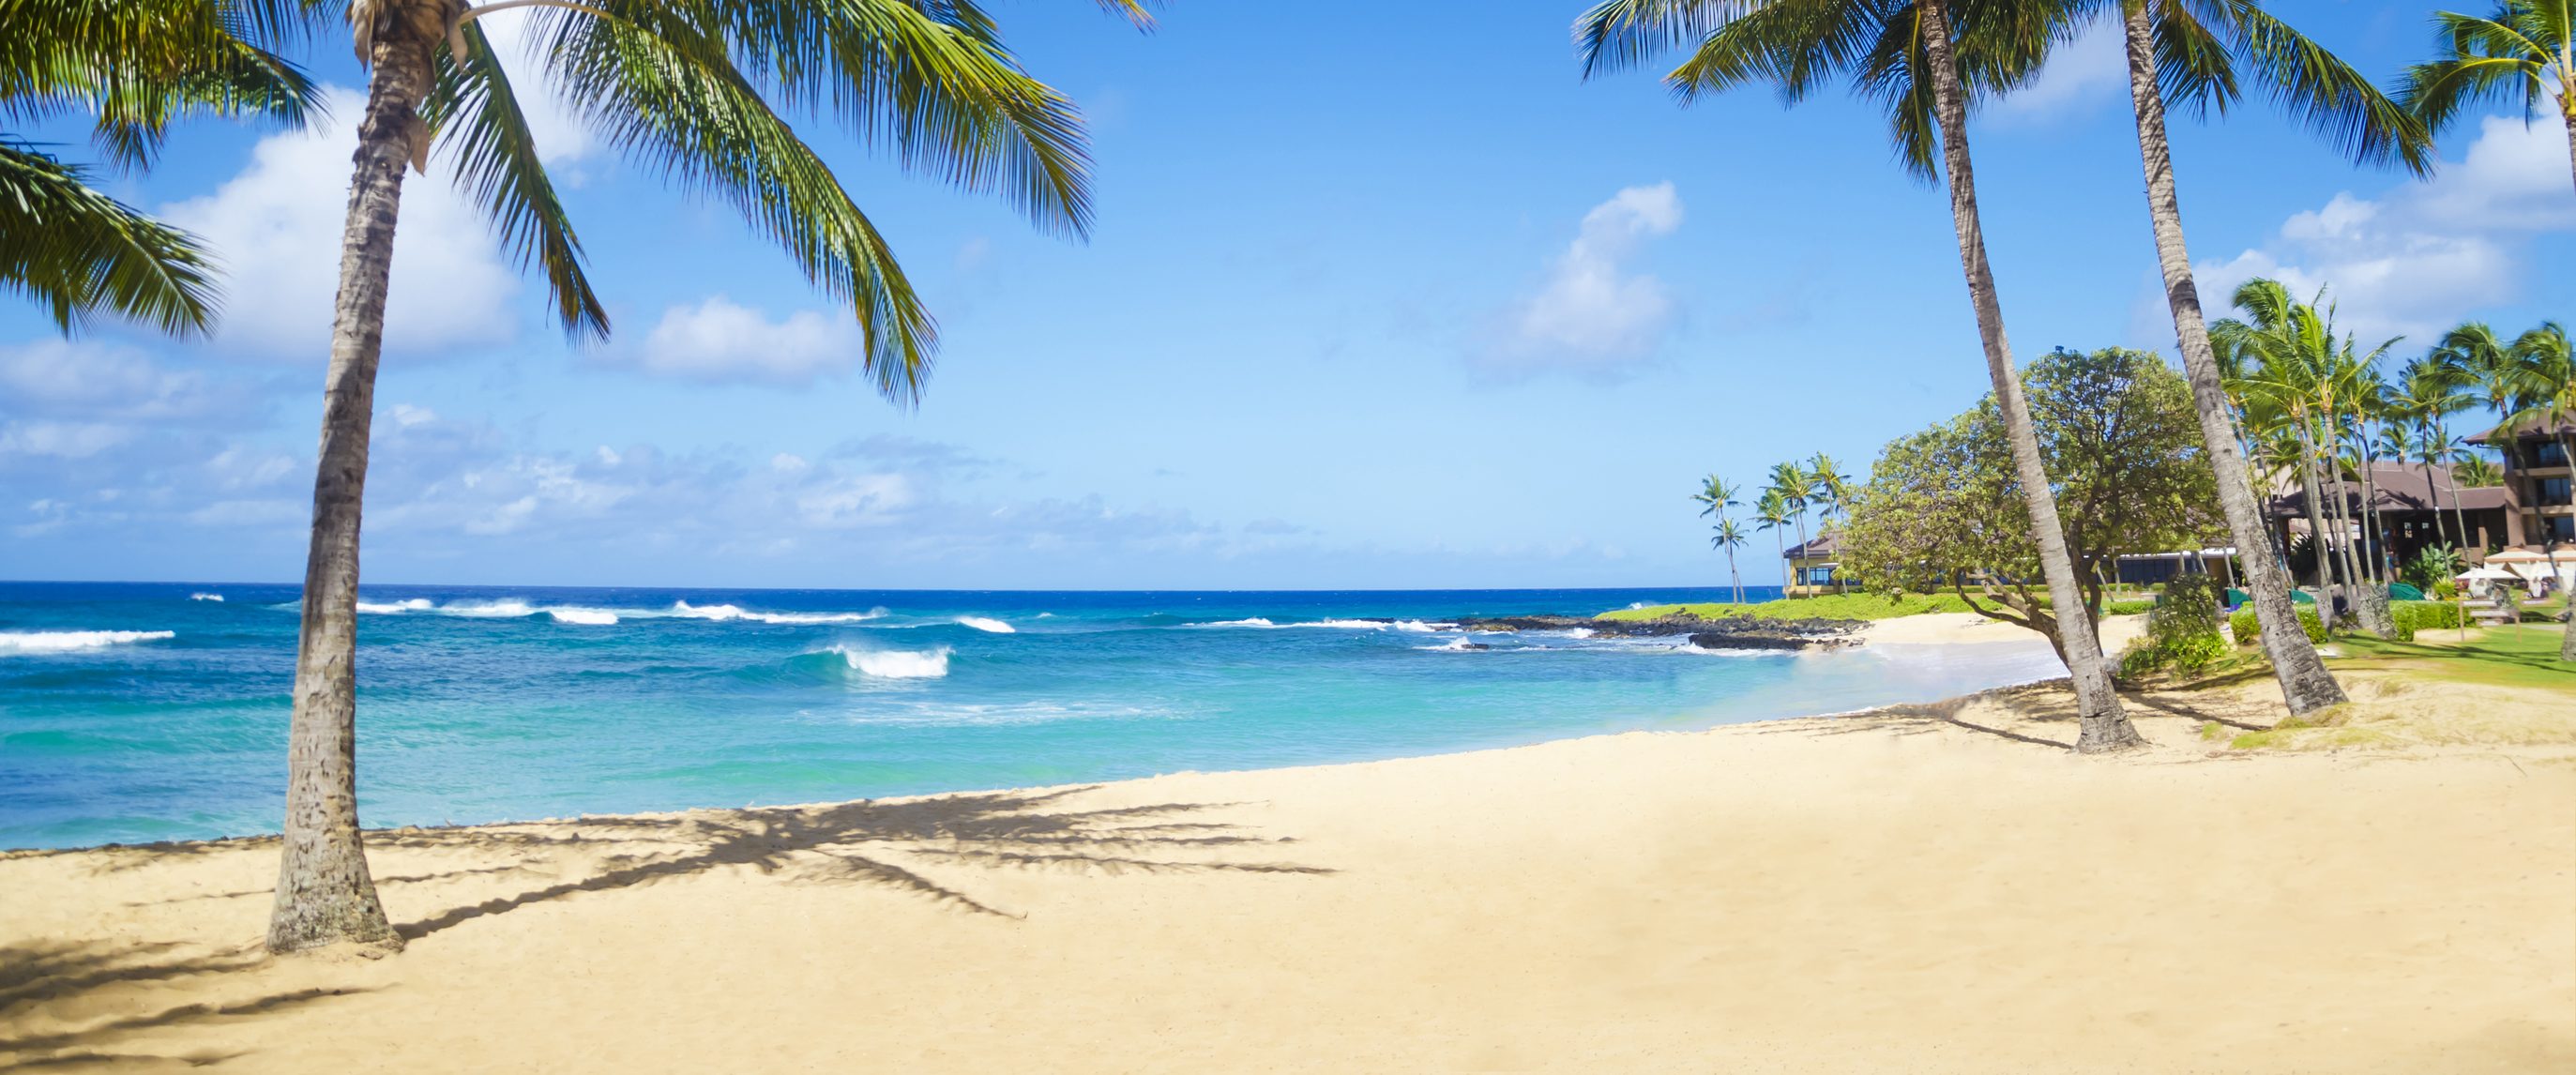 Flights to Hawaii in the $400s round-trip!